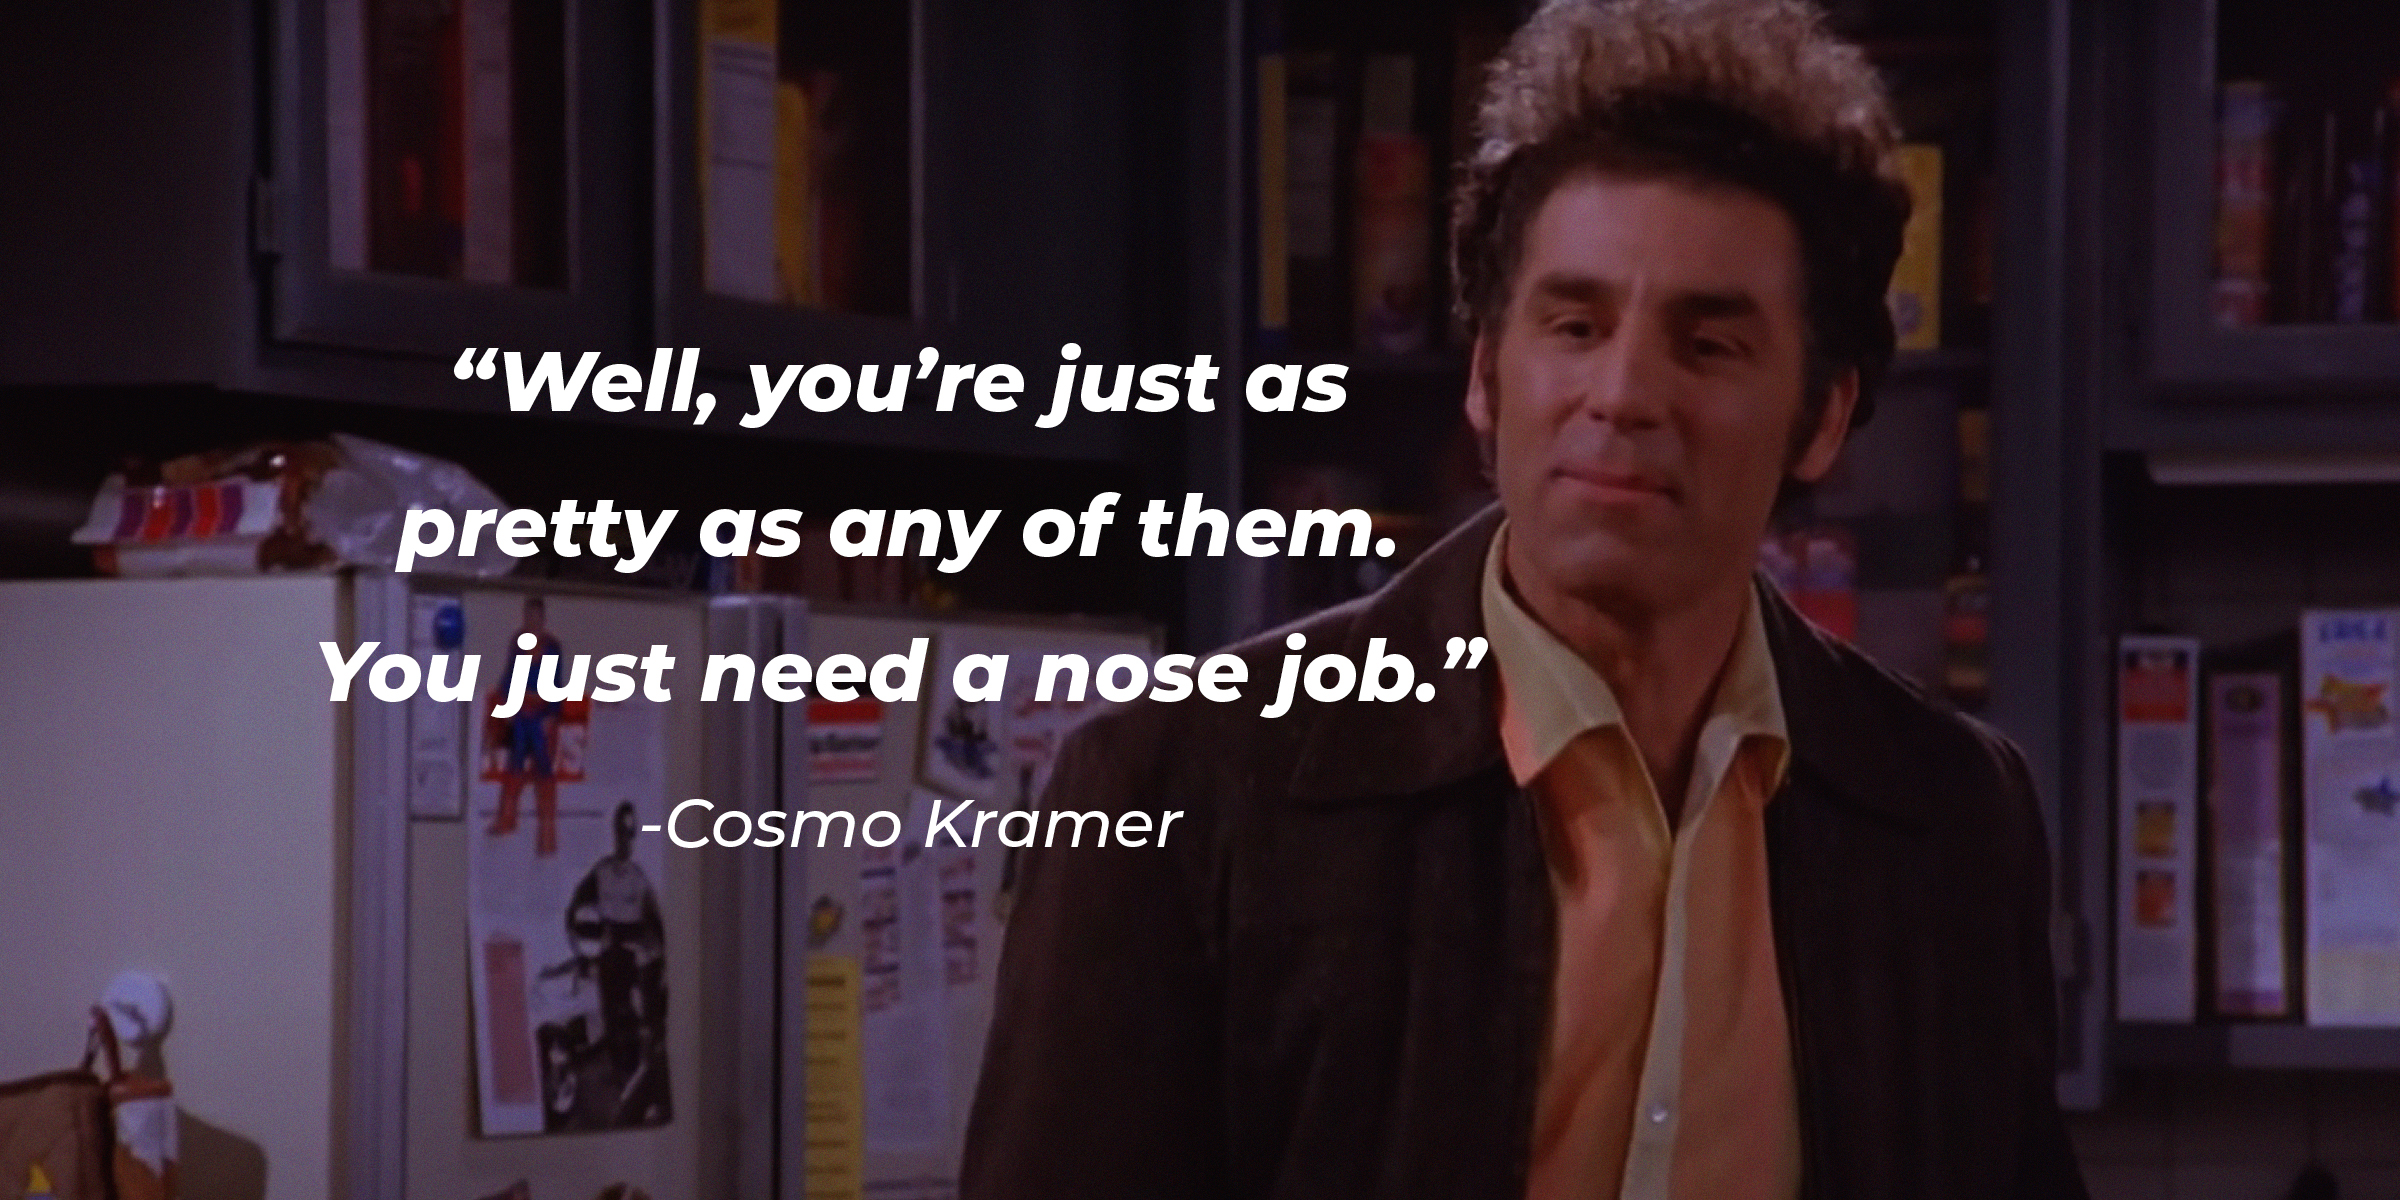 Cosmo Kramer’s quote: “Well, you’re just as pretty as any of them. You just need a nose job.” | Source: AmoDays